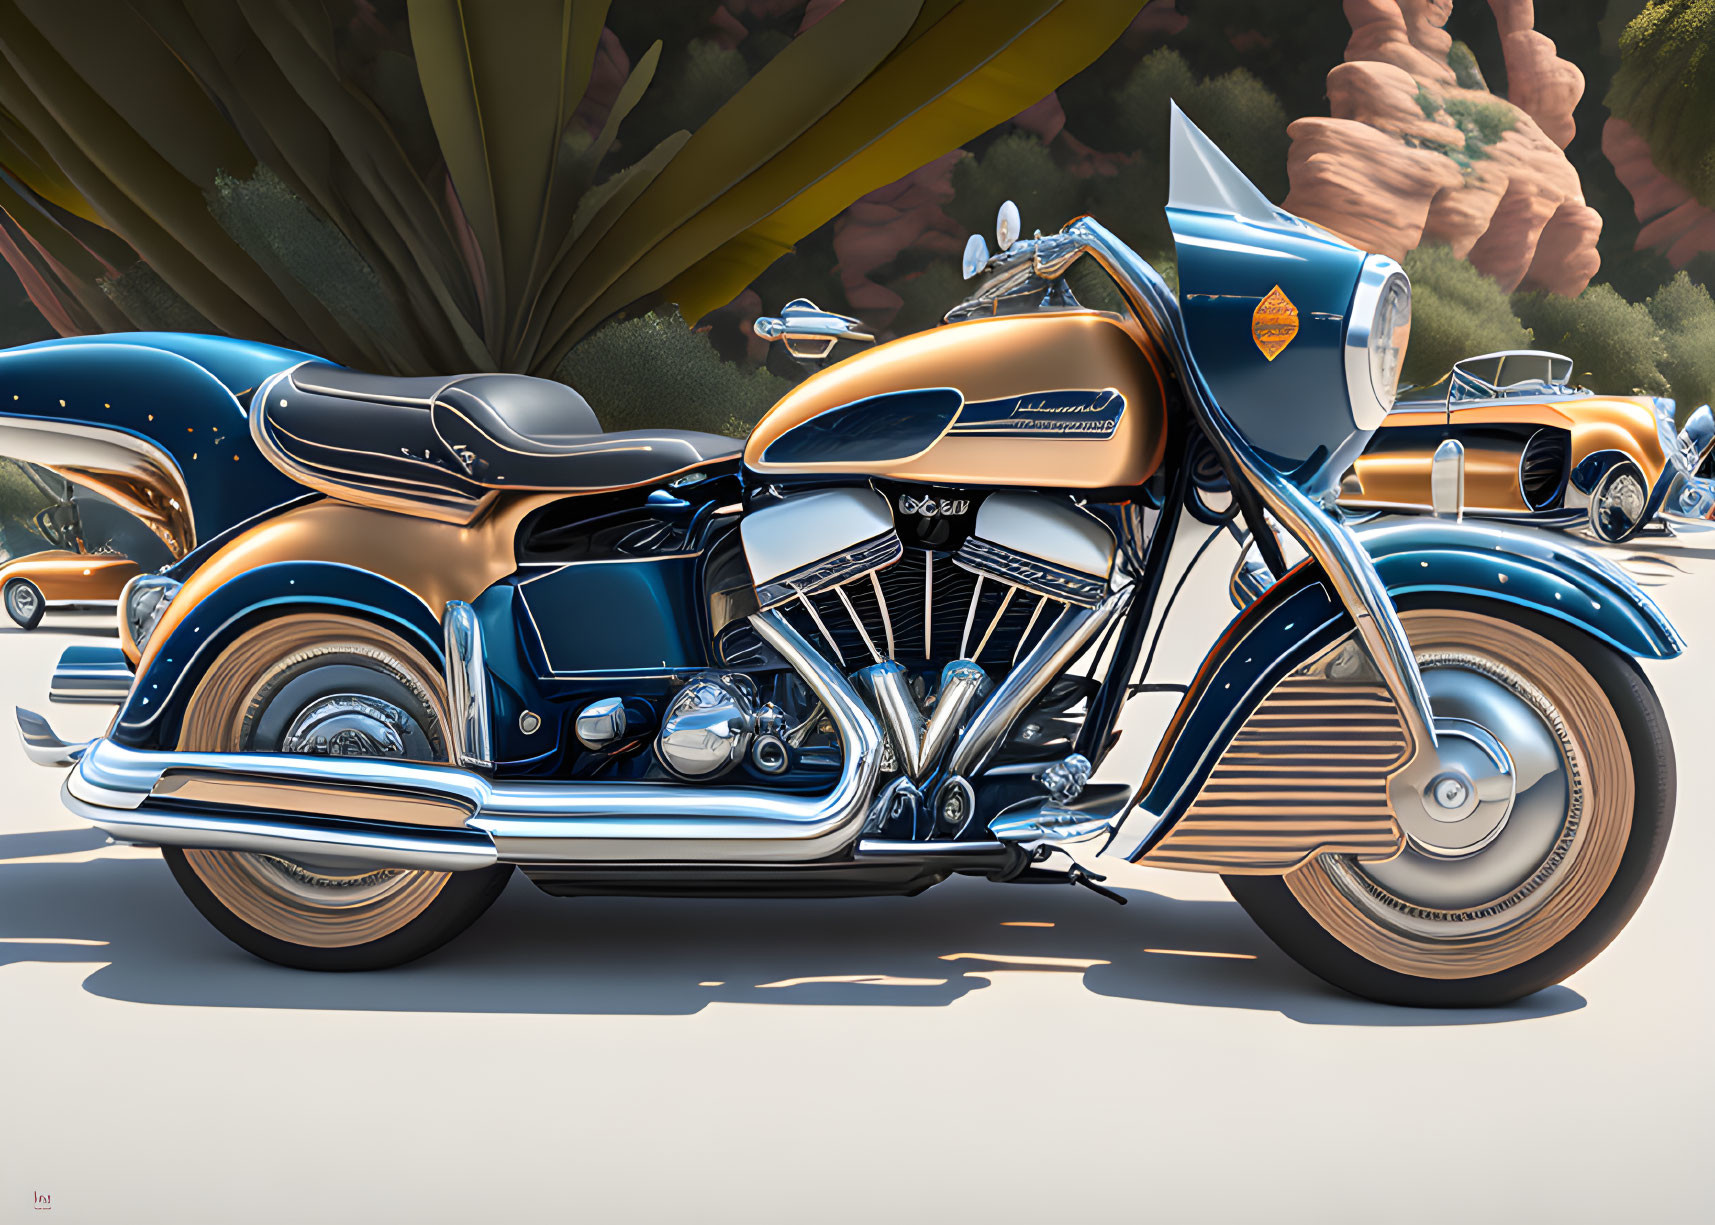 Vintage Blue and Orange Motorcycle with Classic Design and Chrome Details in Desert Landscape